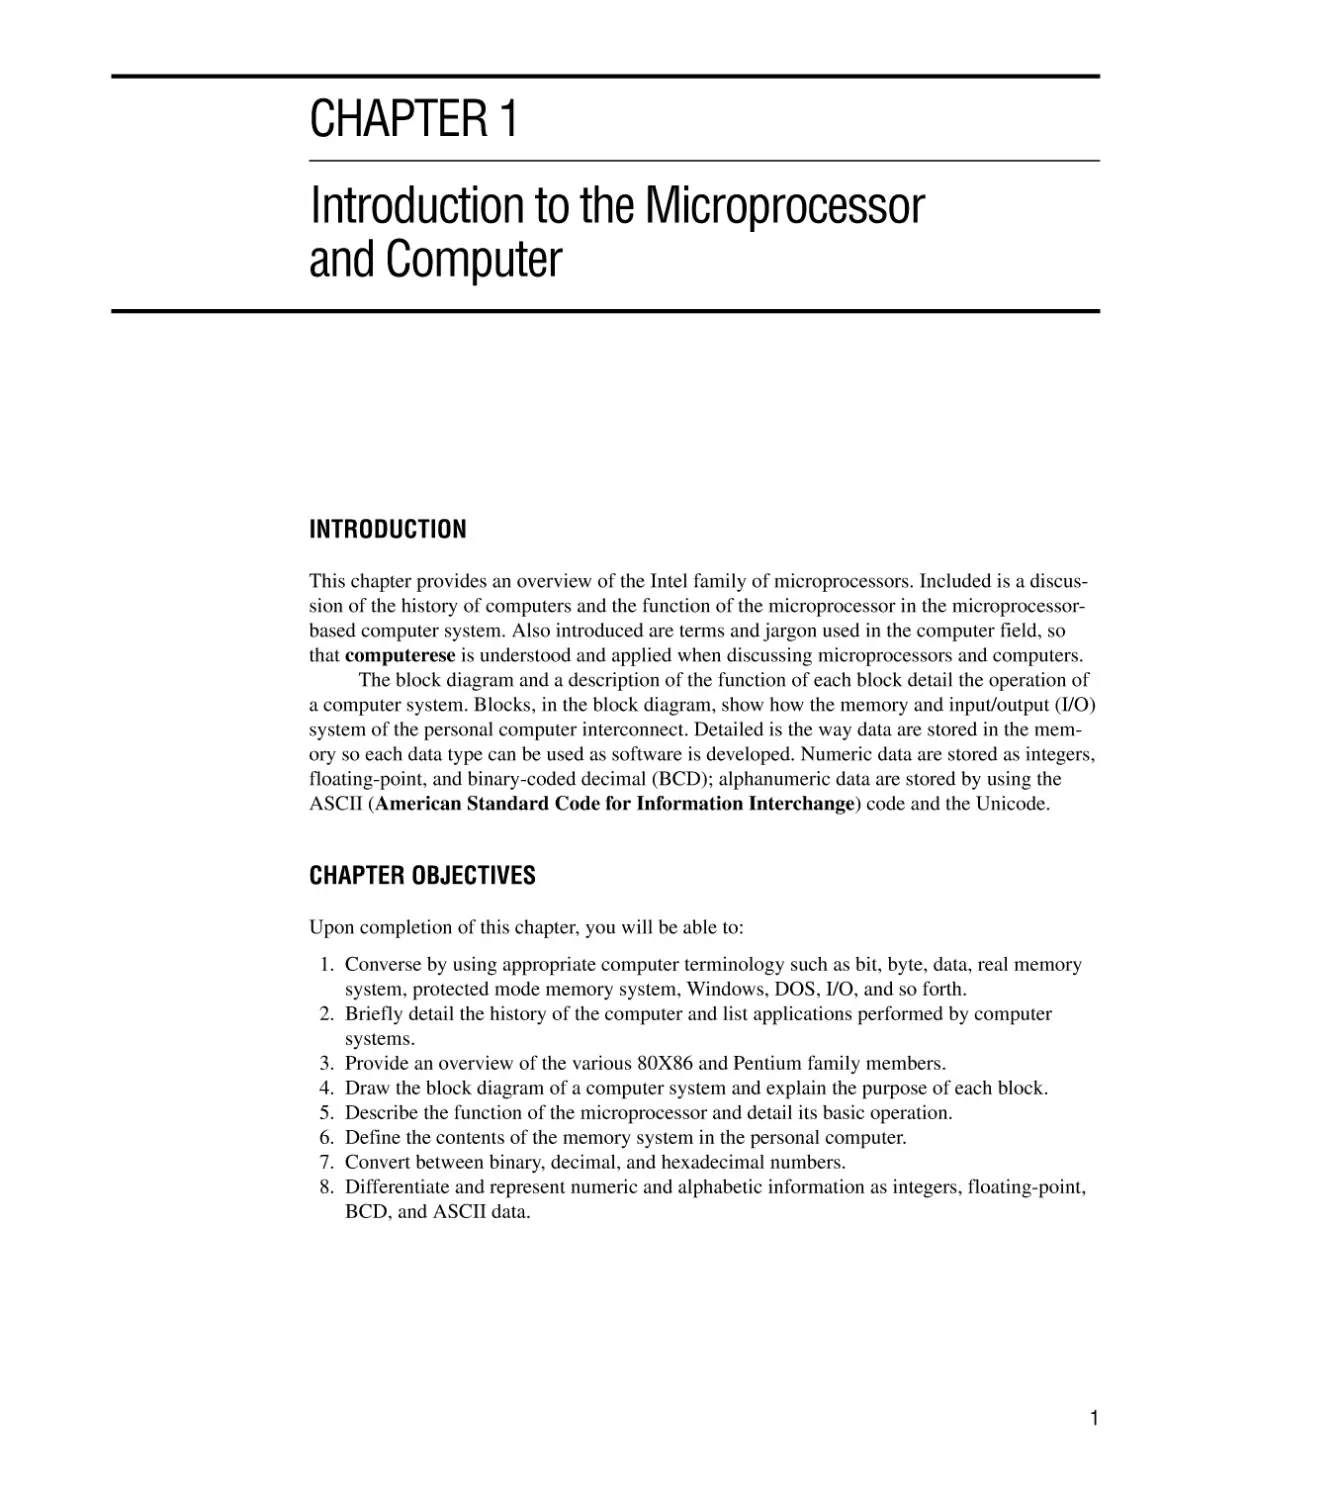 CHAPTER 1 INTRODUCTION TO THE MICROPROCESSOR AND COMPUTER
Introduction/Chapter Objectives